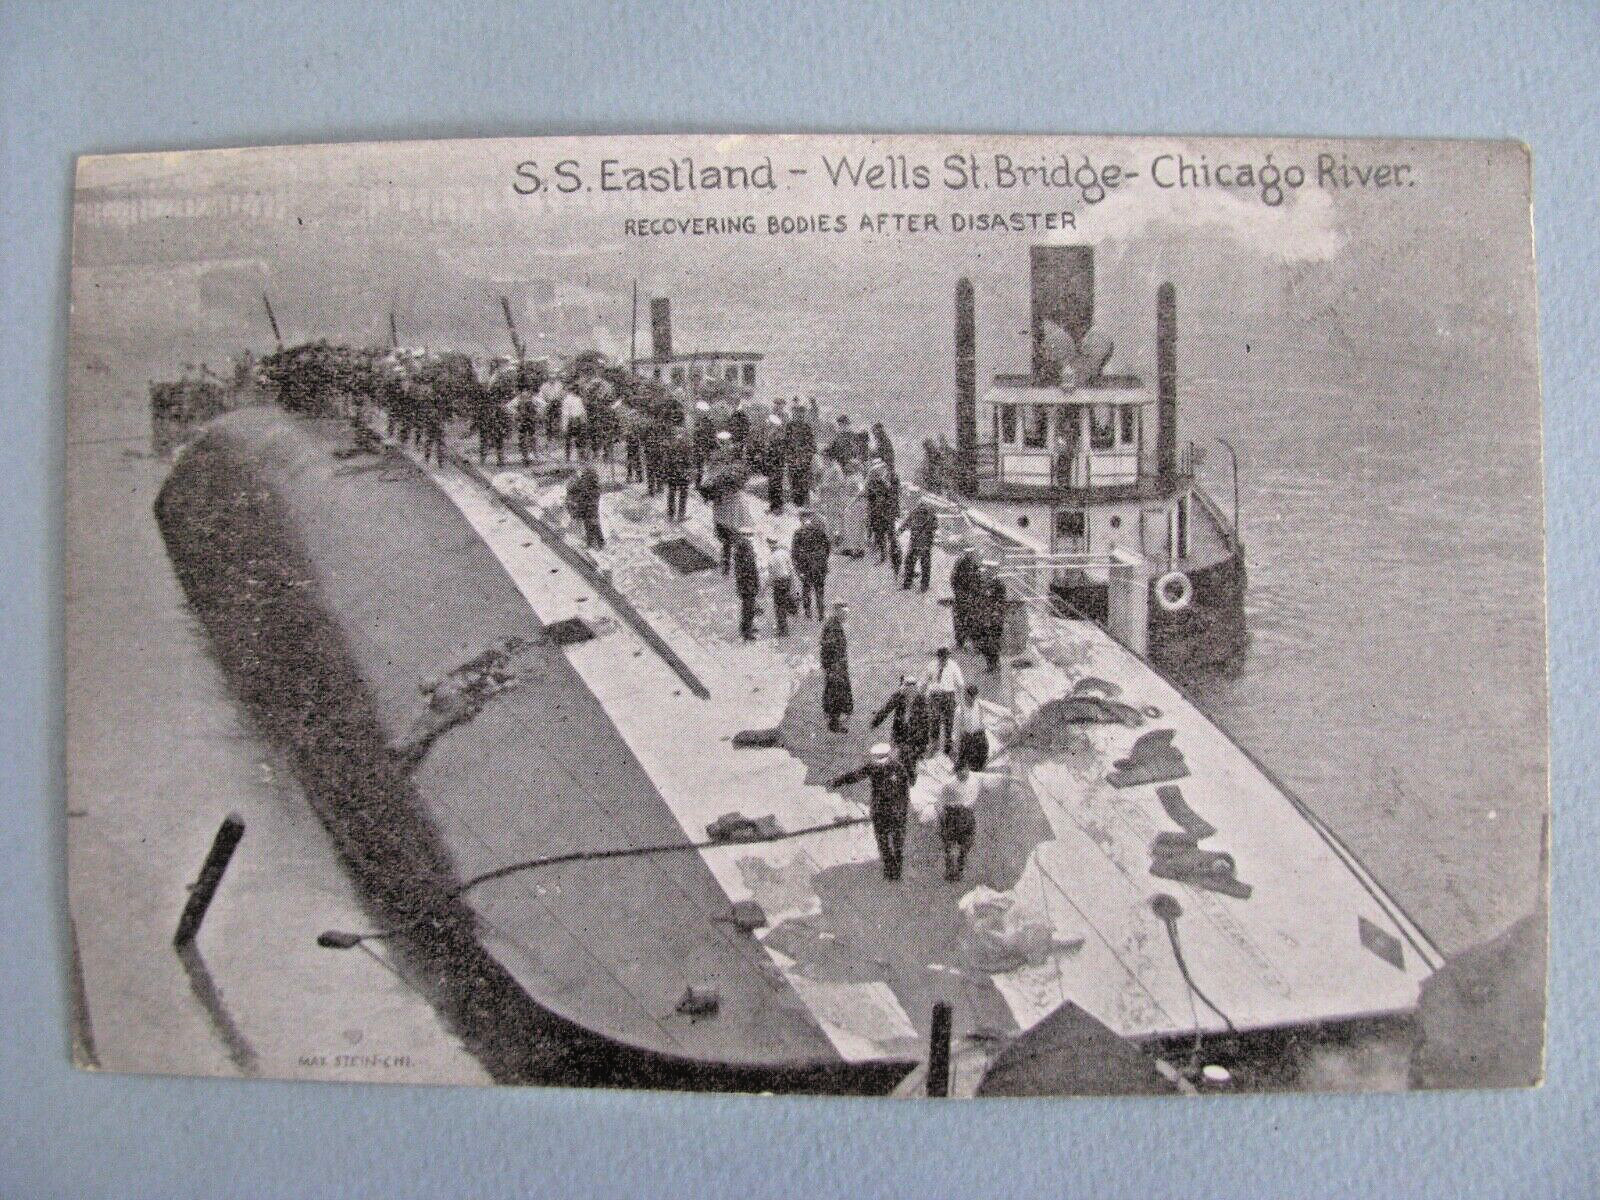 CHICAGO POSTCARD SS EASTLAND WELLS ST. BRIDGE-CHICAGO RIVER RECOVERING BODIES